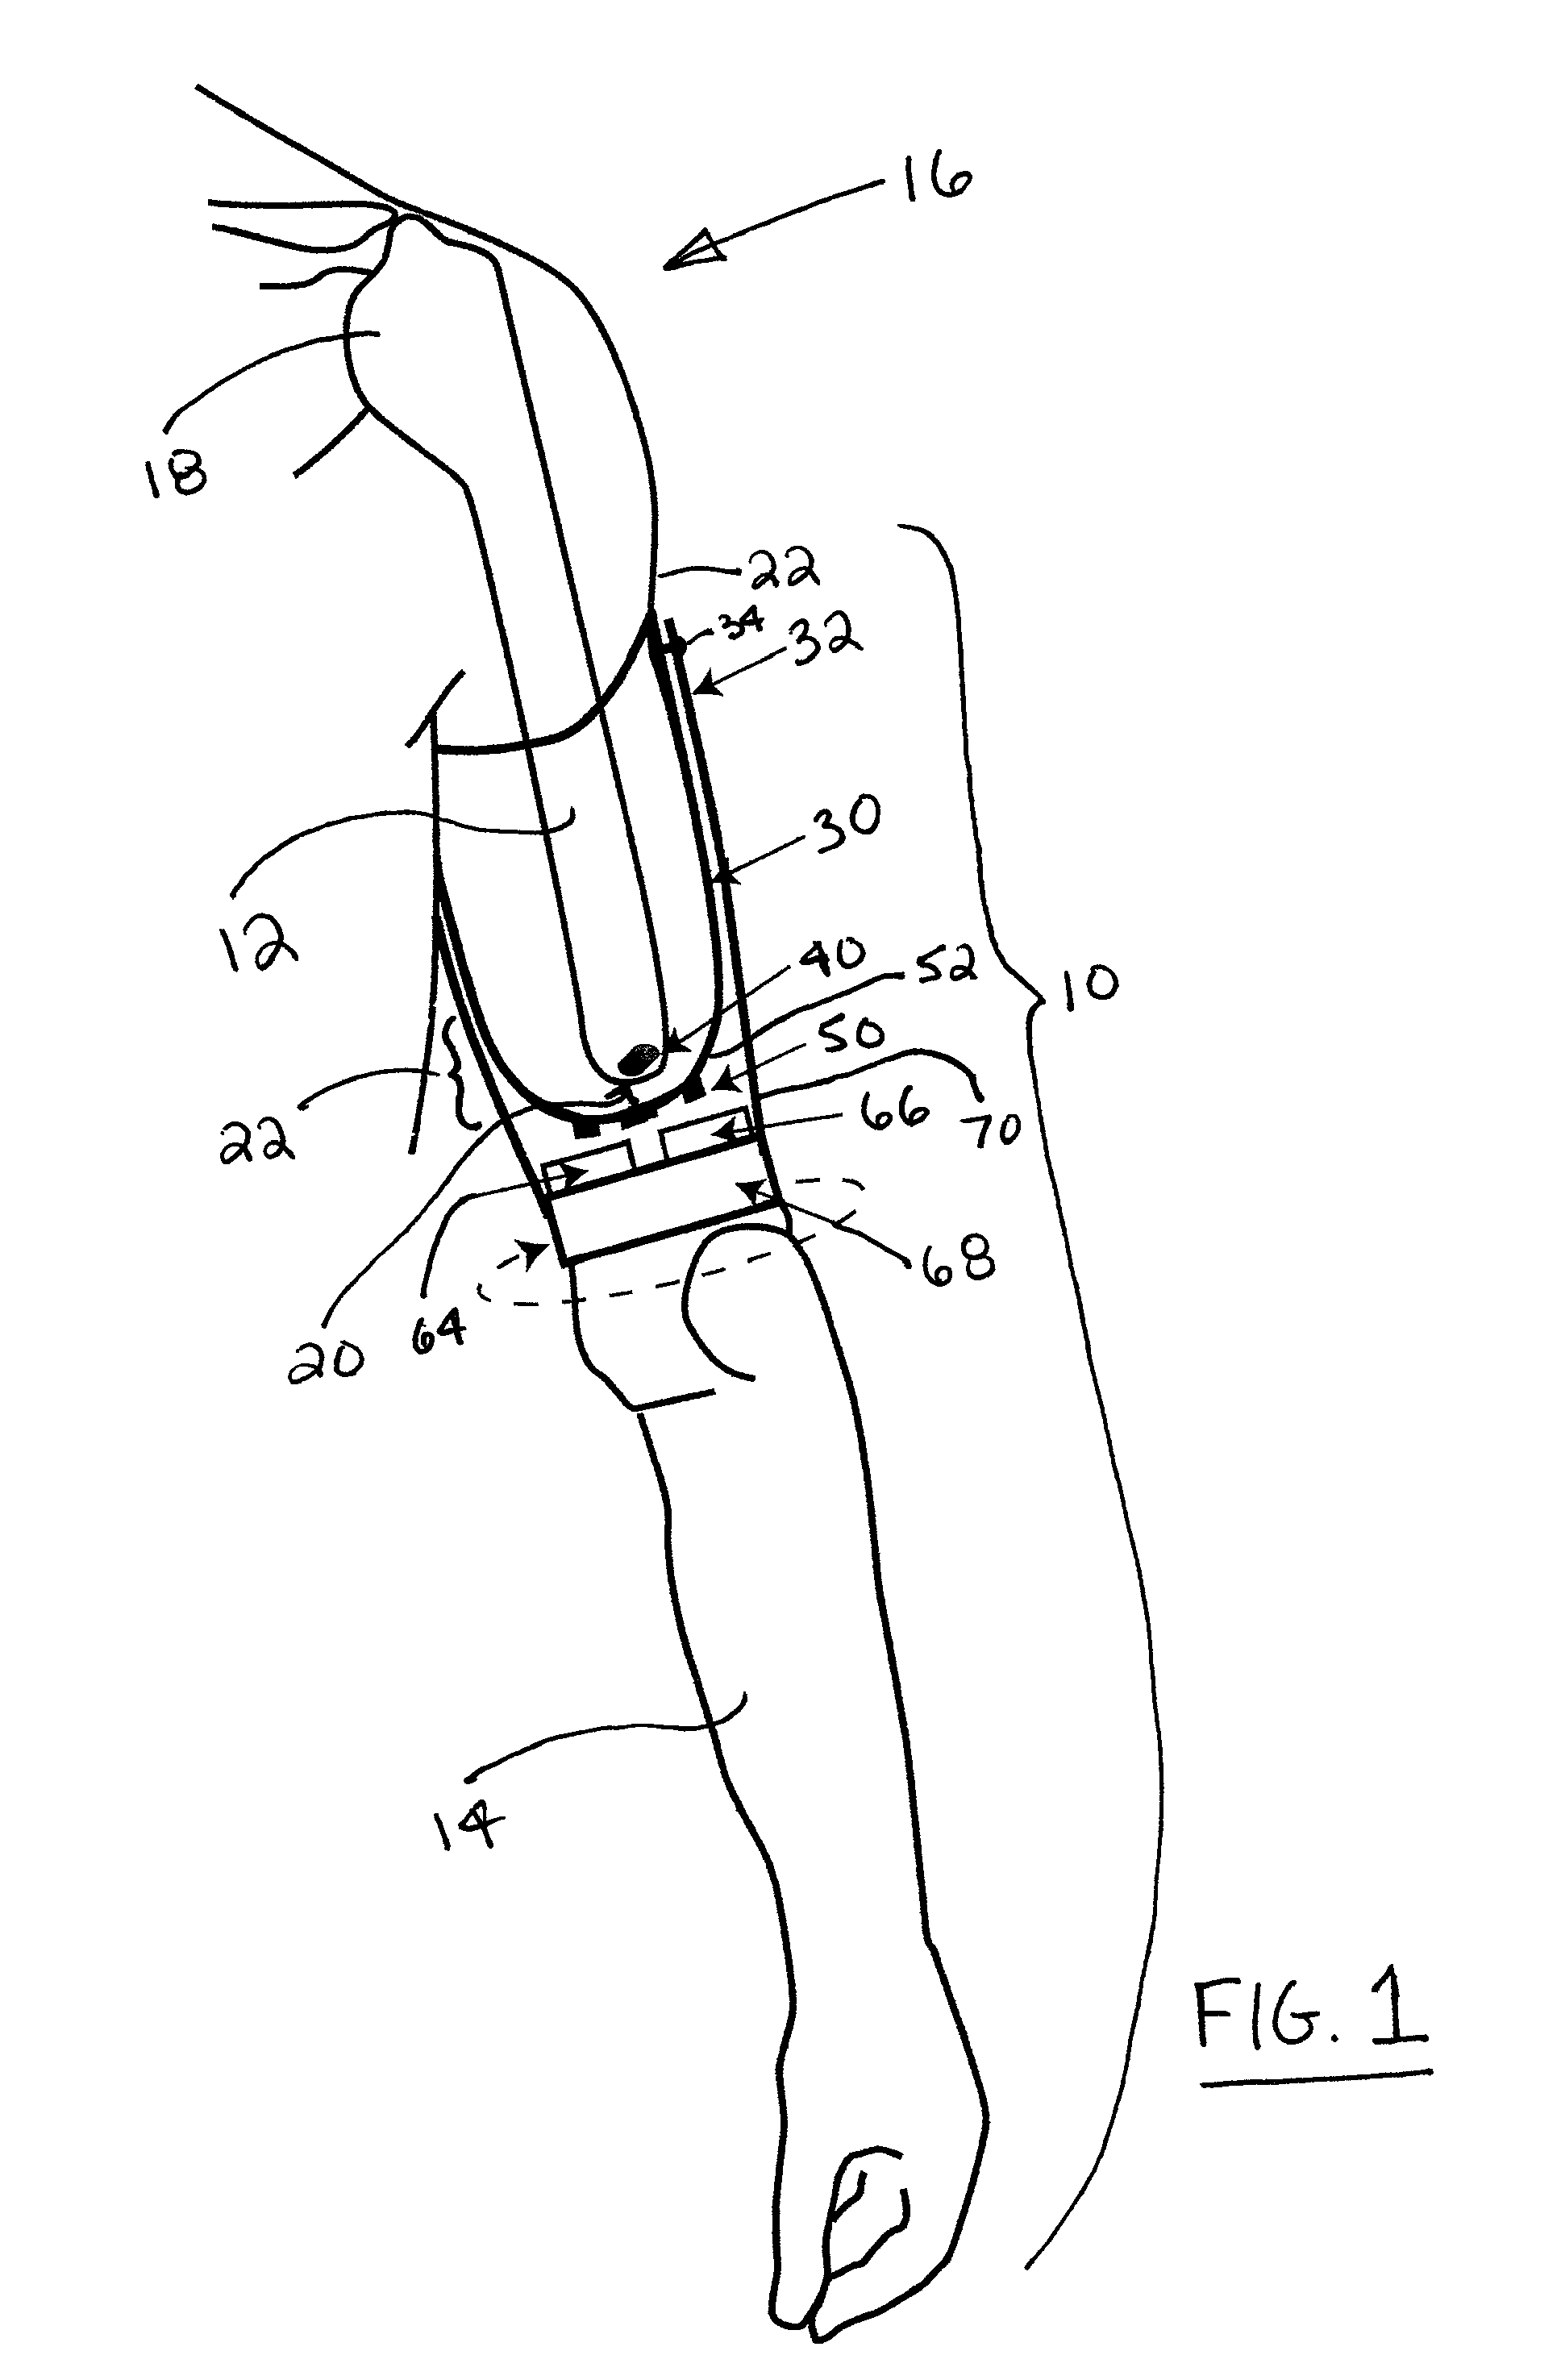 Method and apparatus for prosthetic limb rotation control